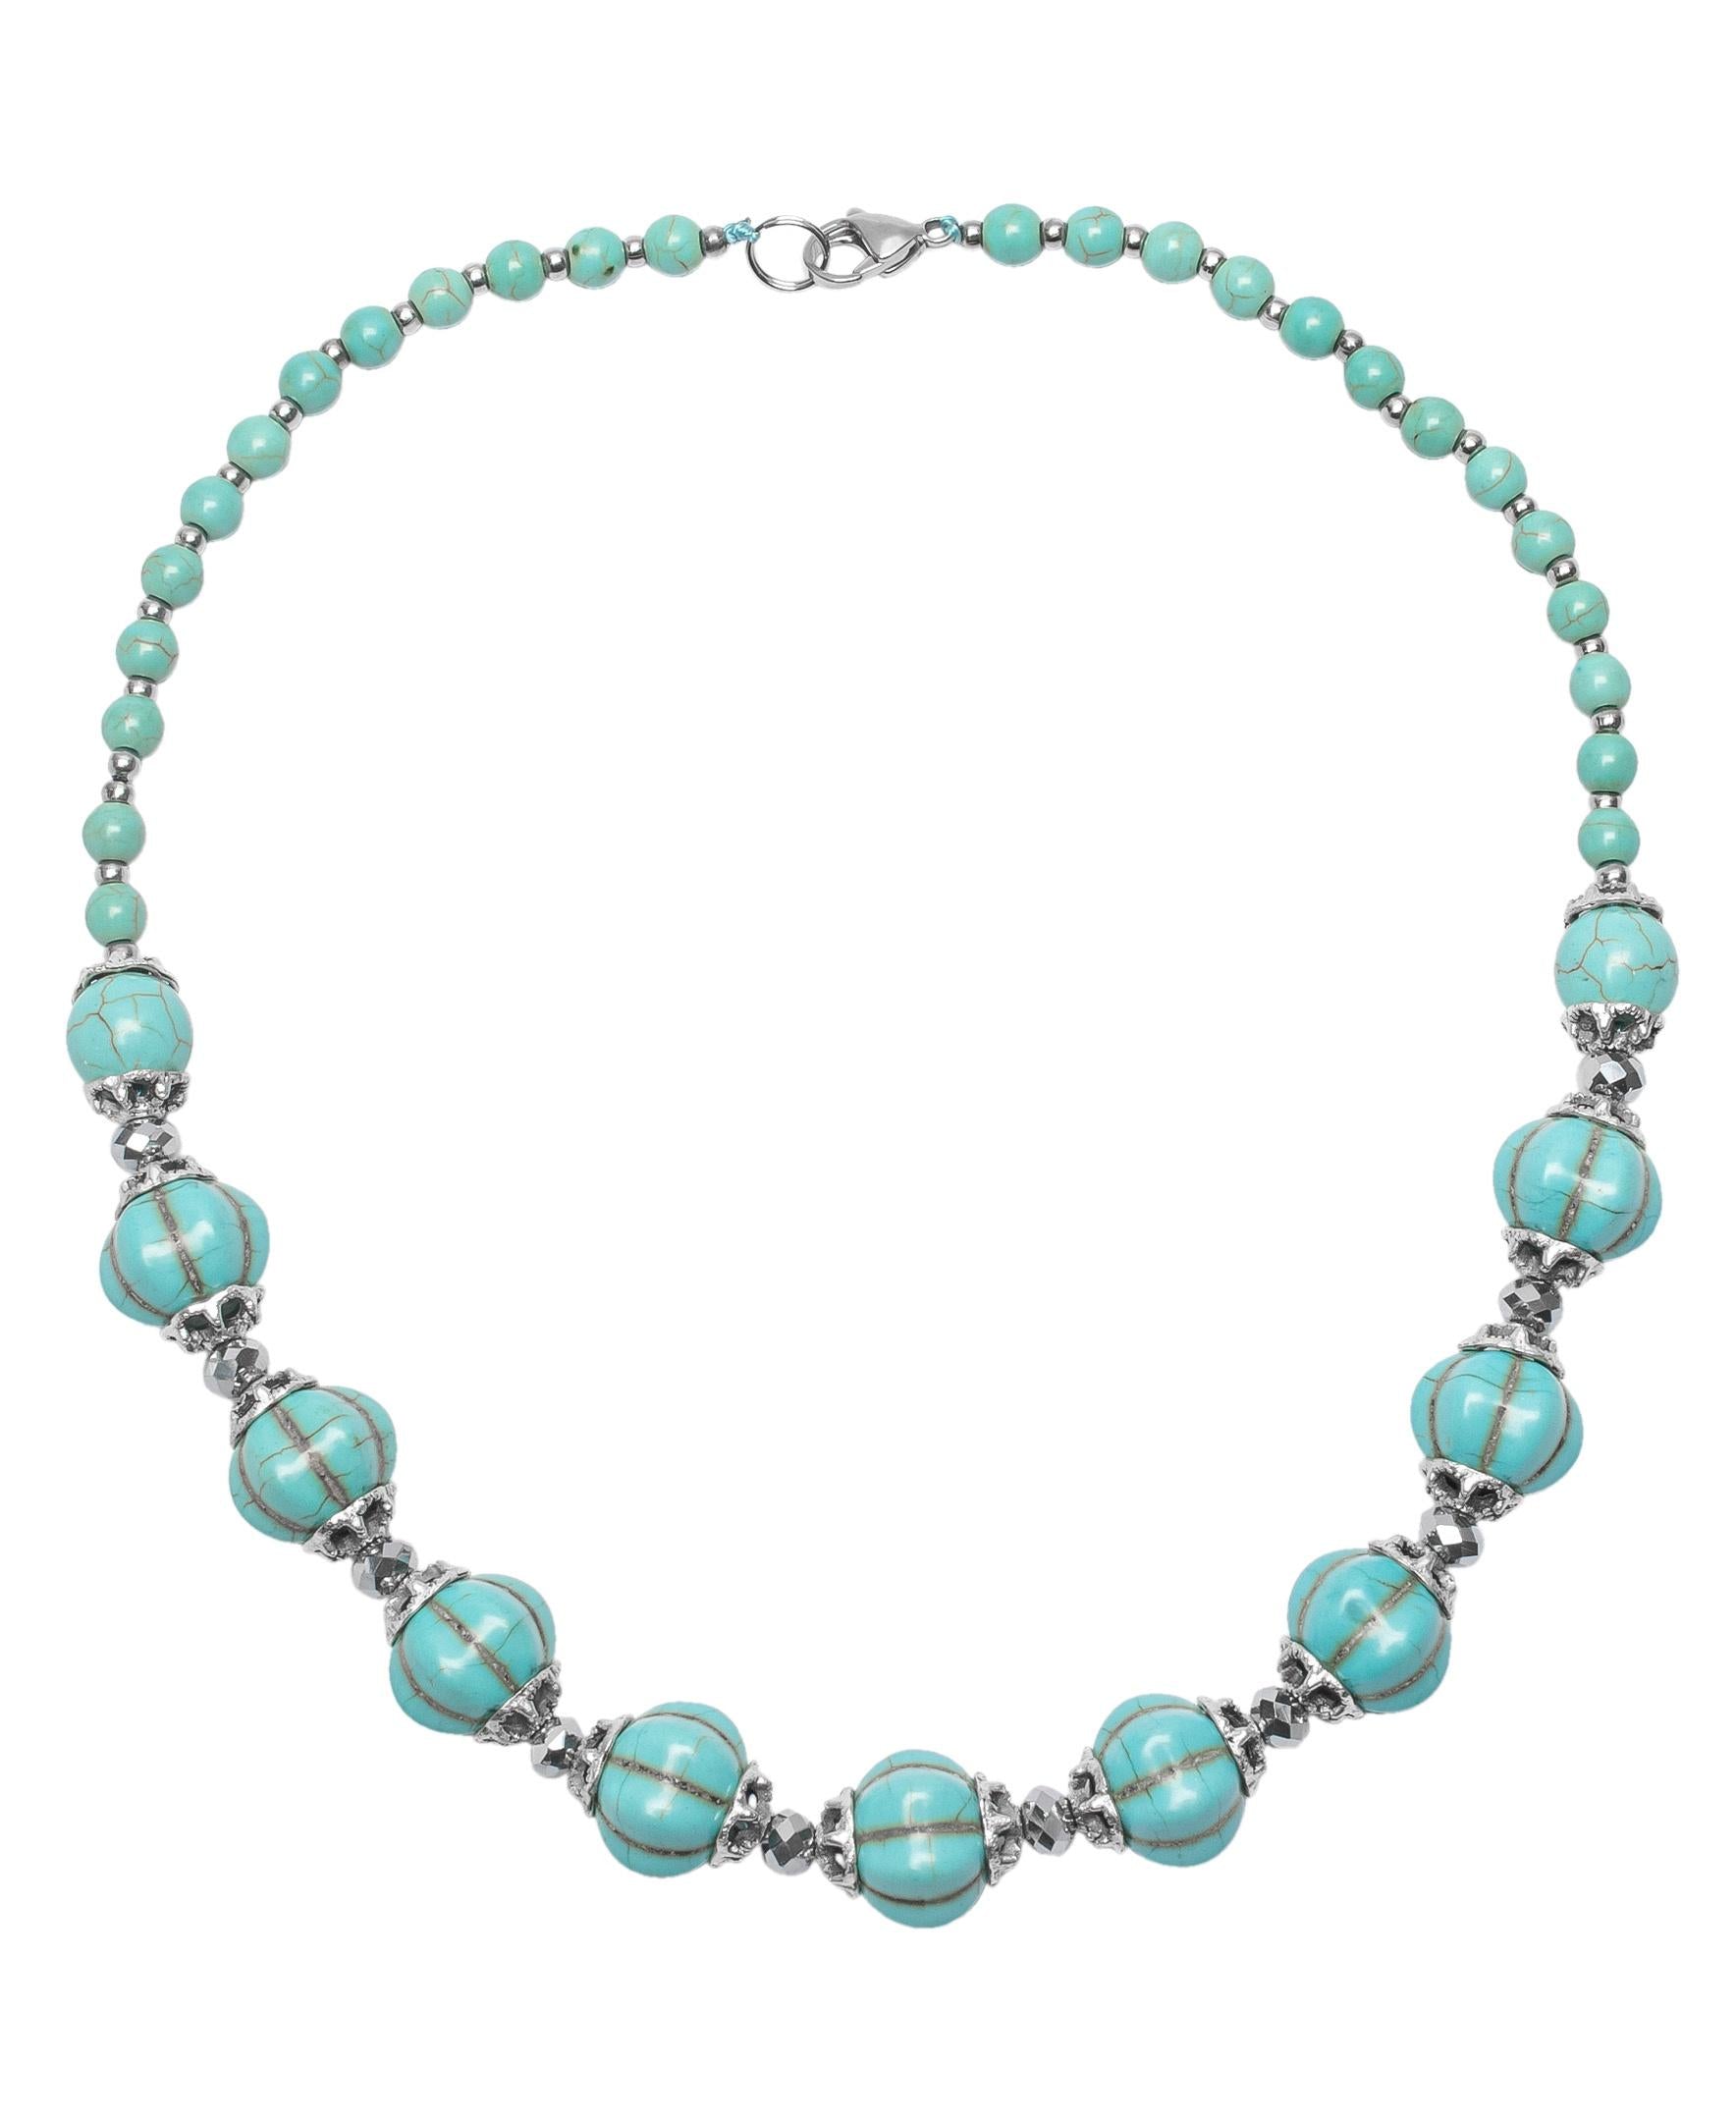 Silver Plated Chunky Bead Turquoise Dyed Howlite Necklace